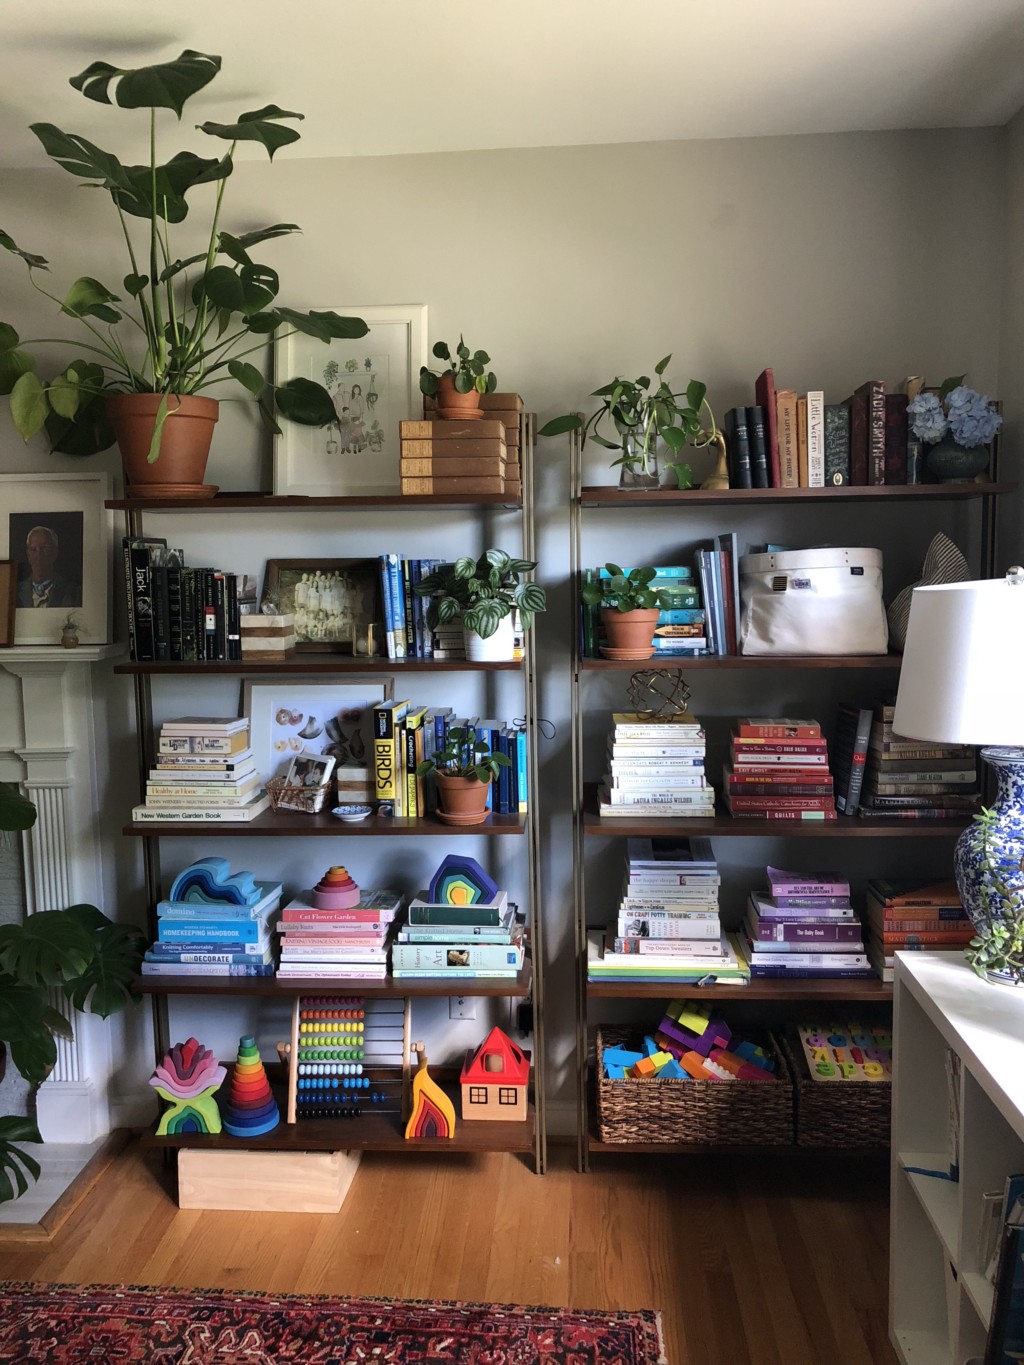 Just a fraction of this plant lady's collection